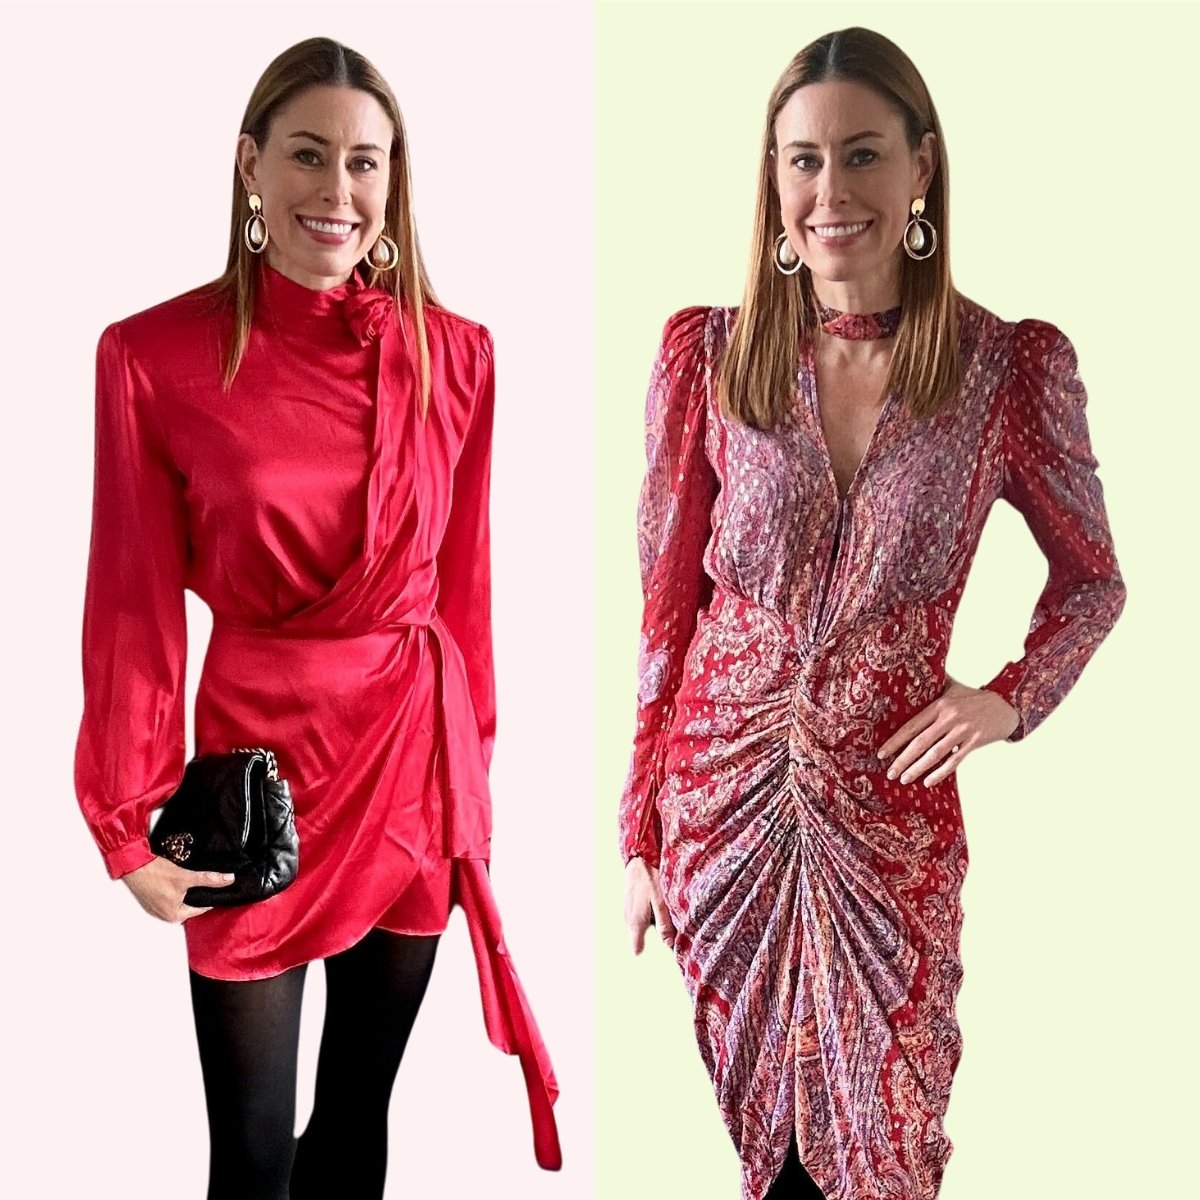 Rent The Runway - Is It Worth It? Review + Everything You Need to